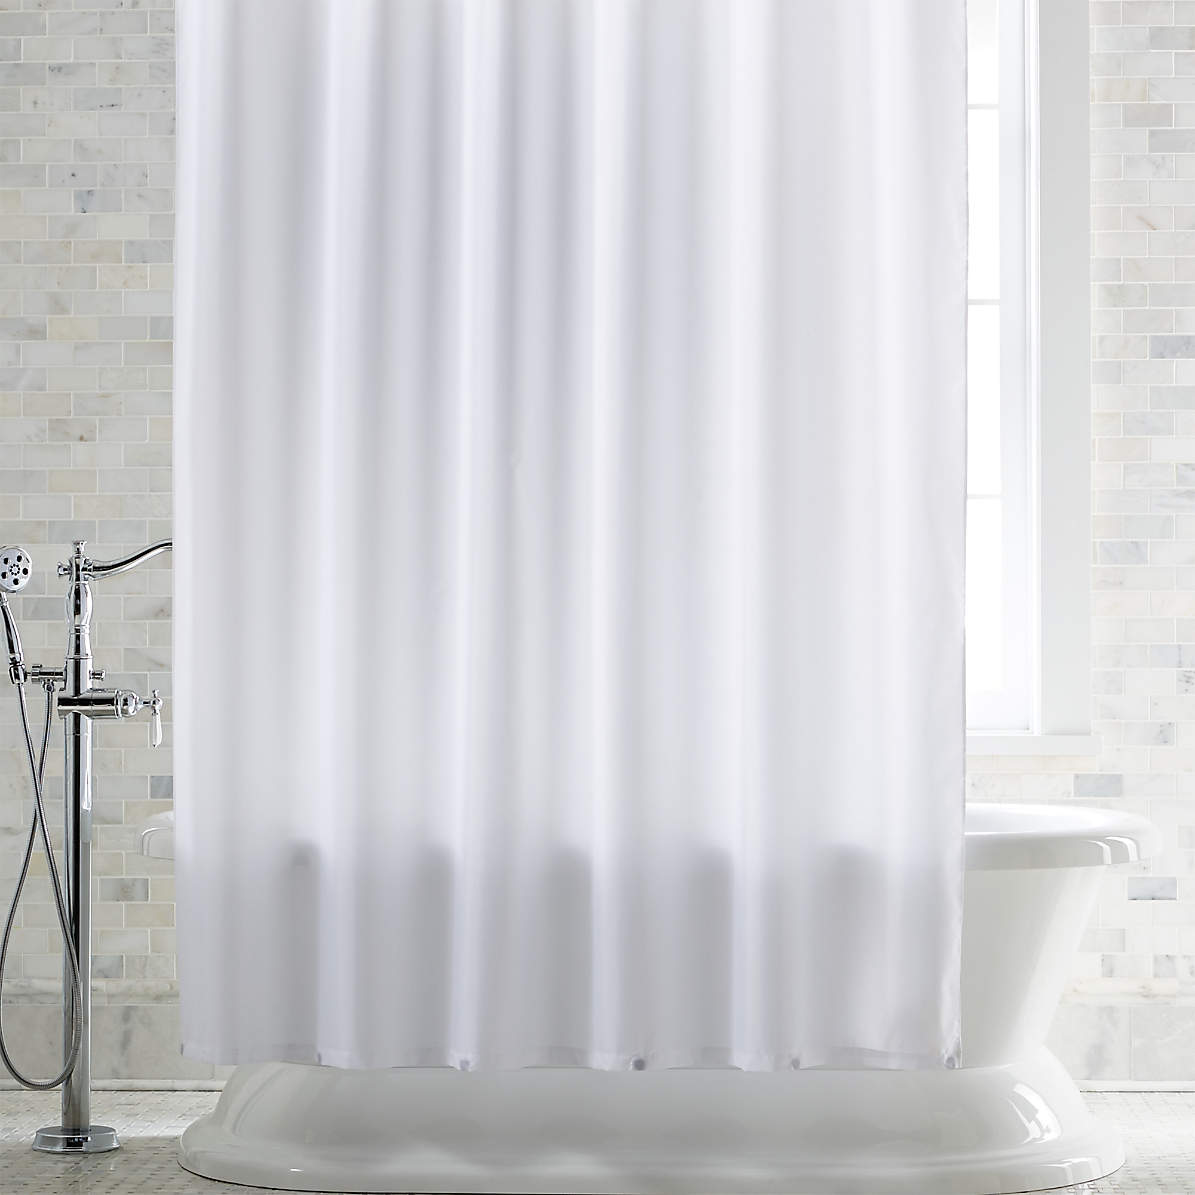 White Shower Curtain Liner With Magnets, White Matelasse Shower Curtain 84cm